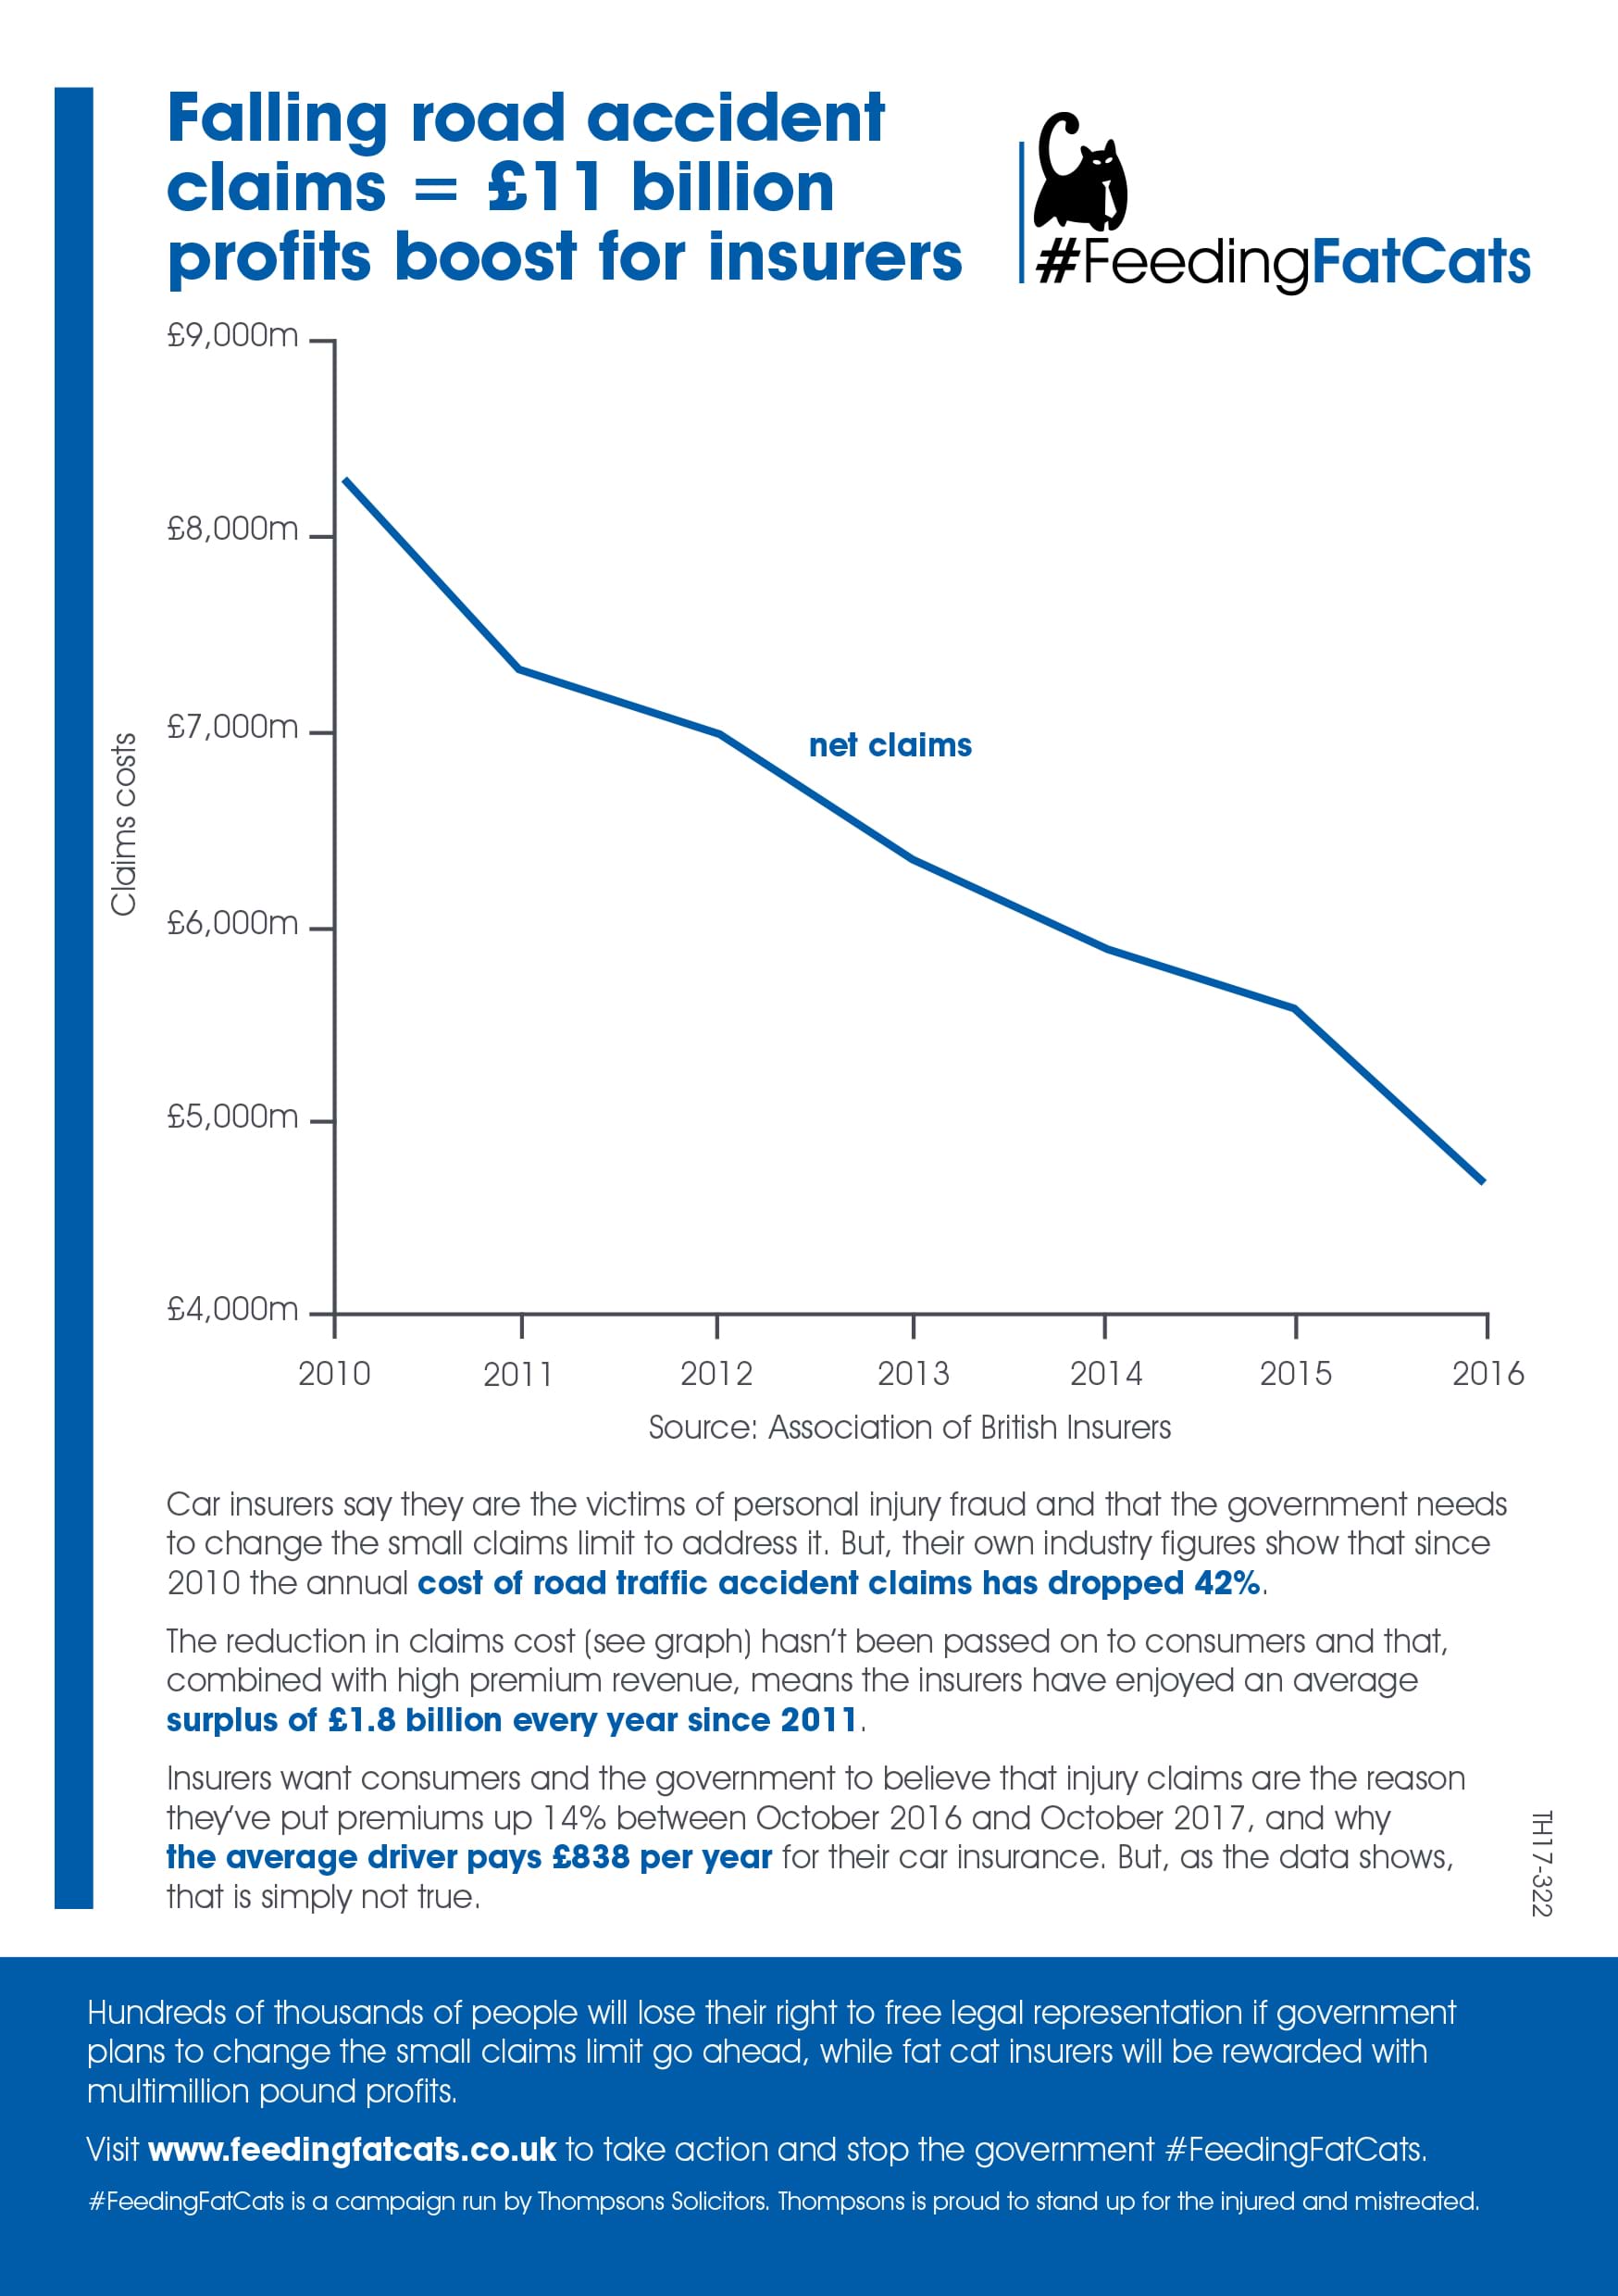 A graph showing how net costs for car insurance claims have fallen since 2010